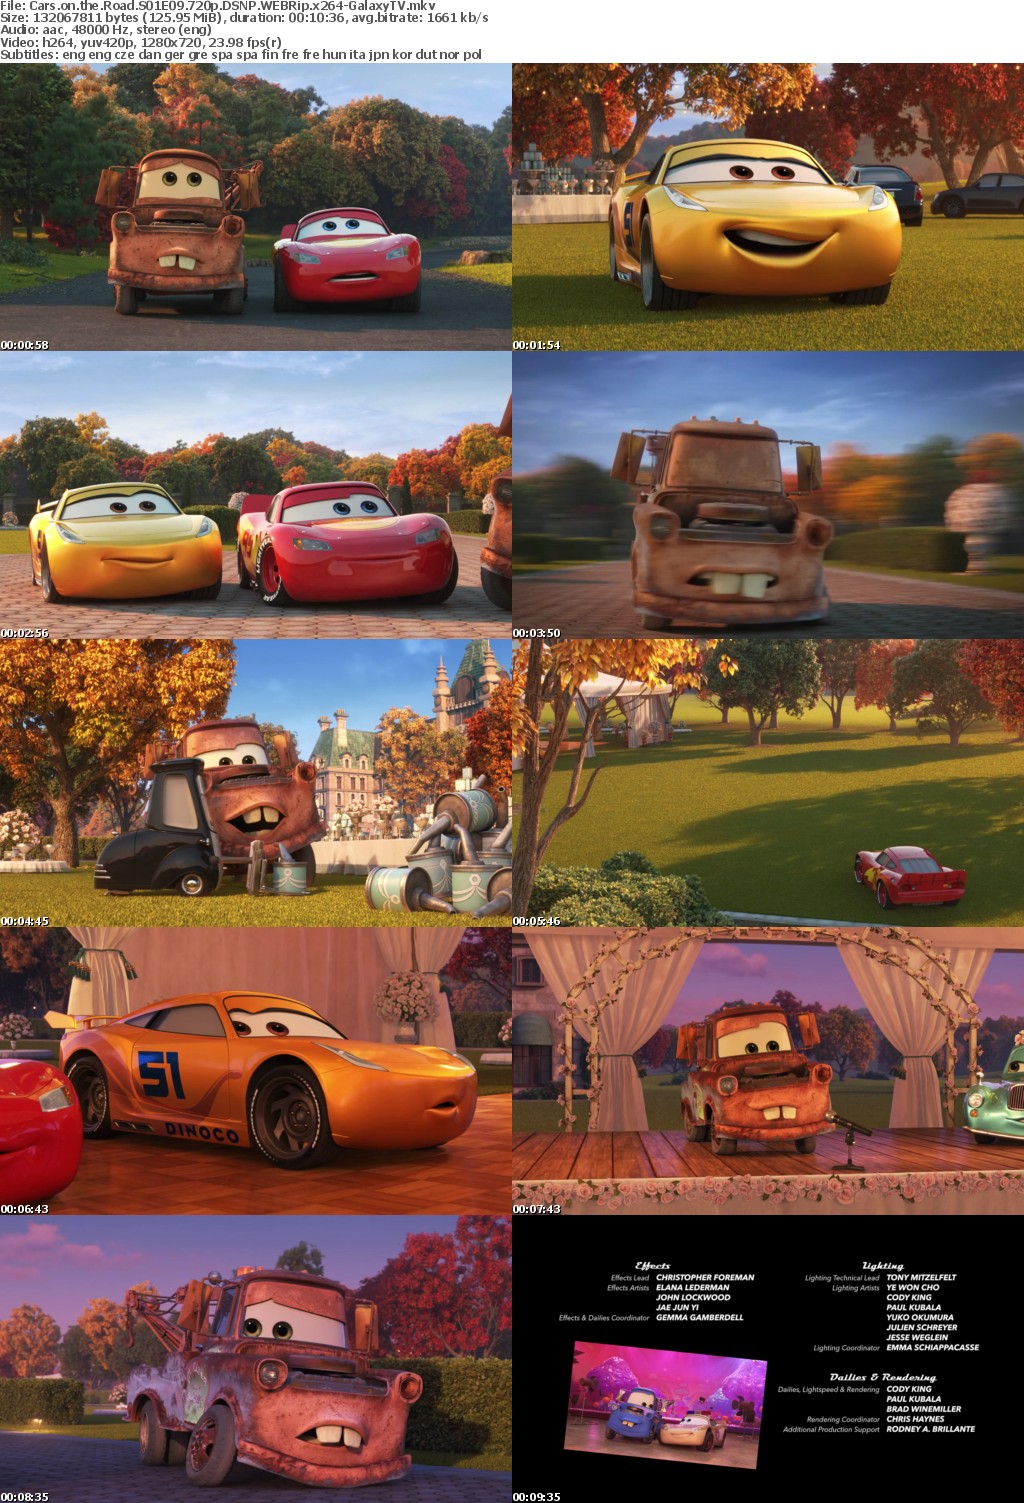 Cars on the Road S01 COMPLETE 720p DSNP WEBRip x264-GalaxyTV